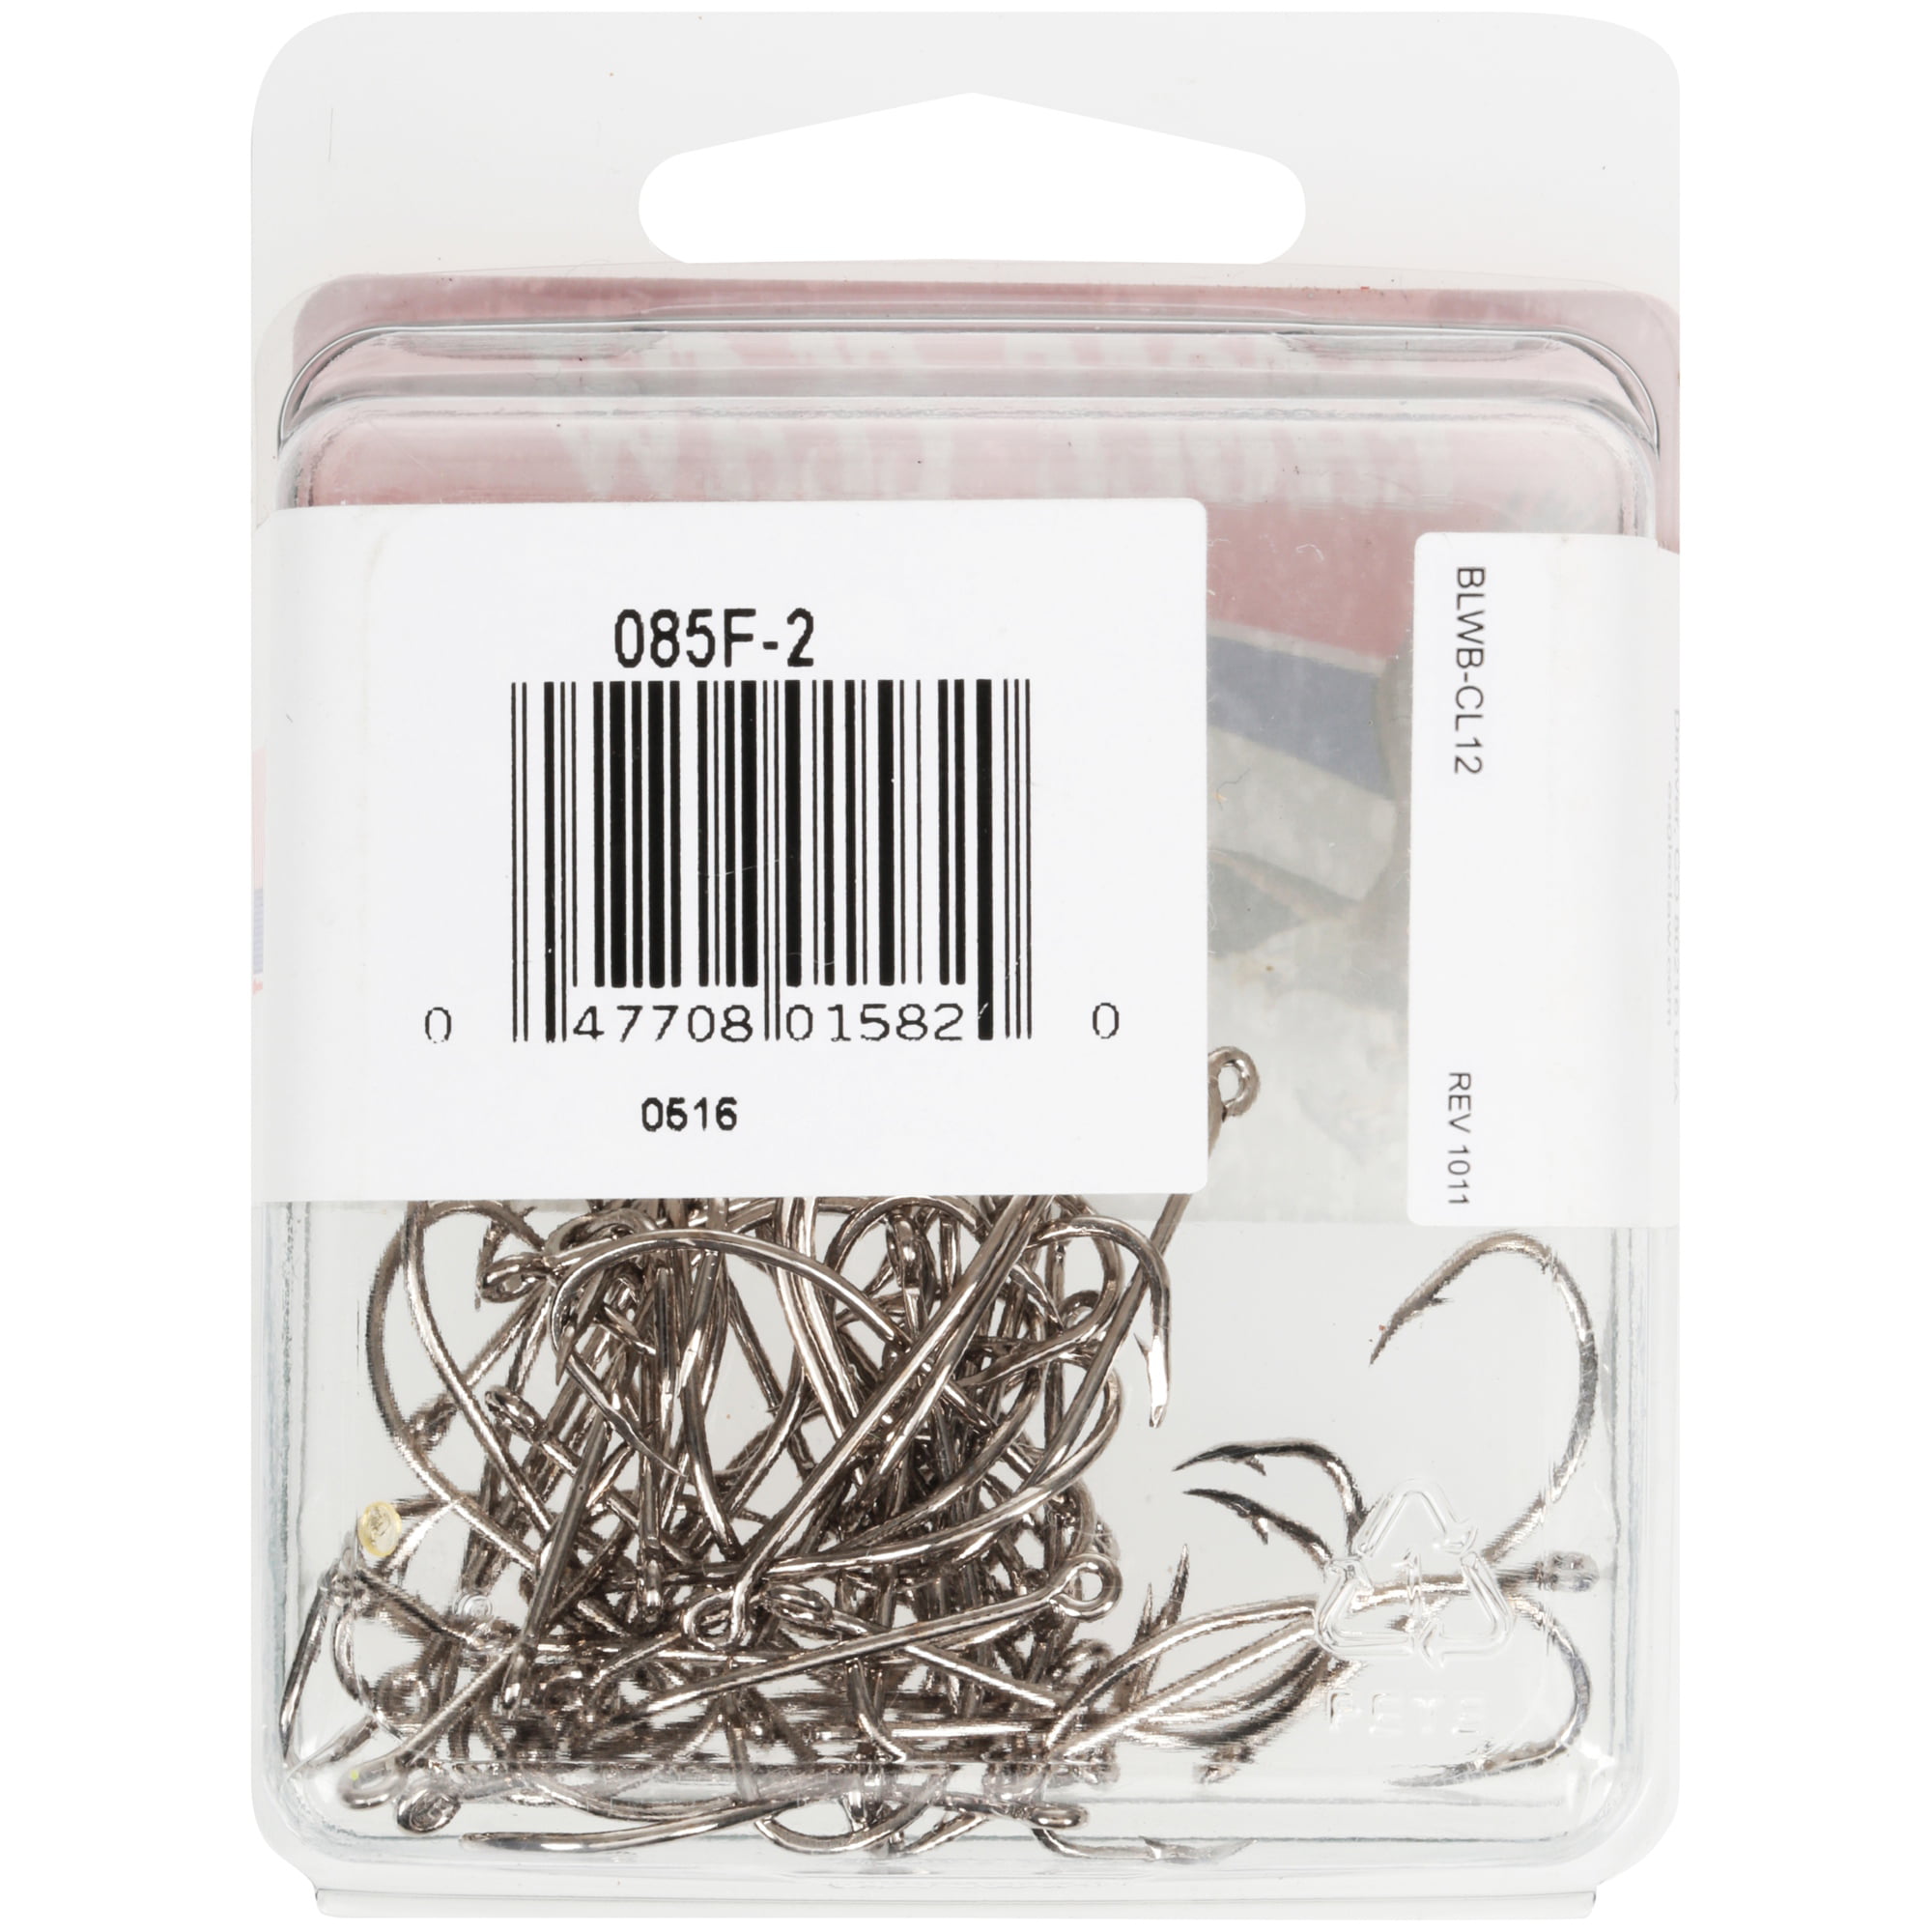 Eagle Claw 085FH-4 All-Purpose Live Bait Plain Shank Fish Hooks 50 Pack, Size  4 